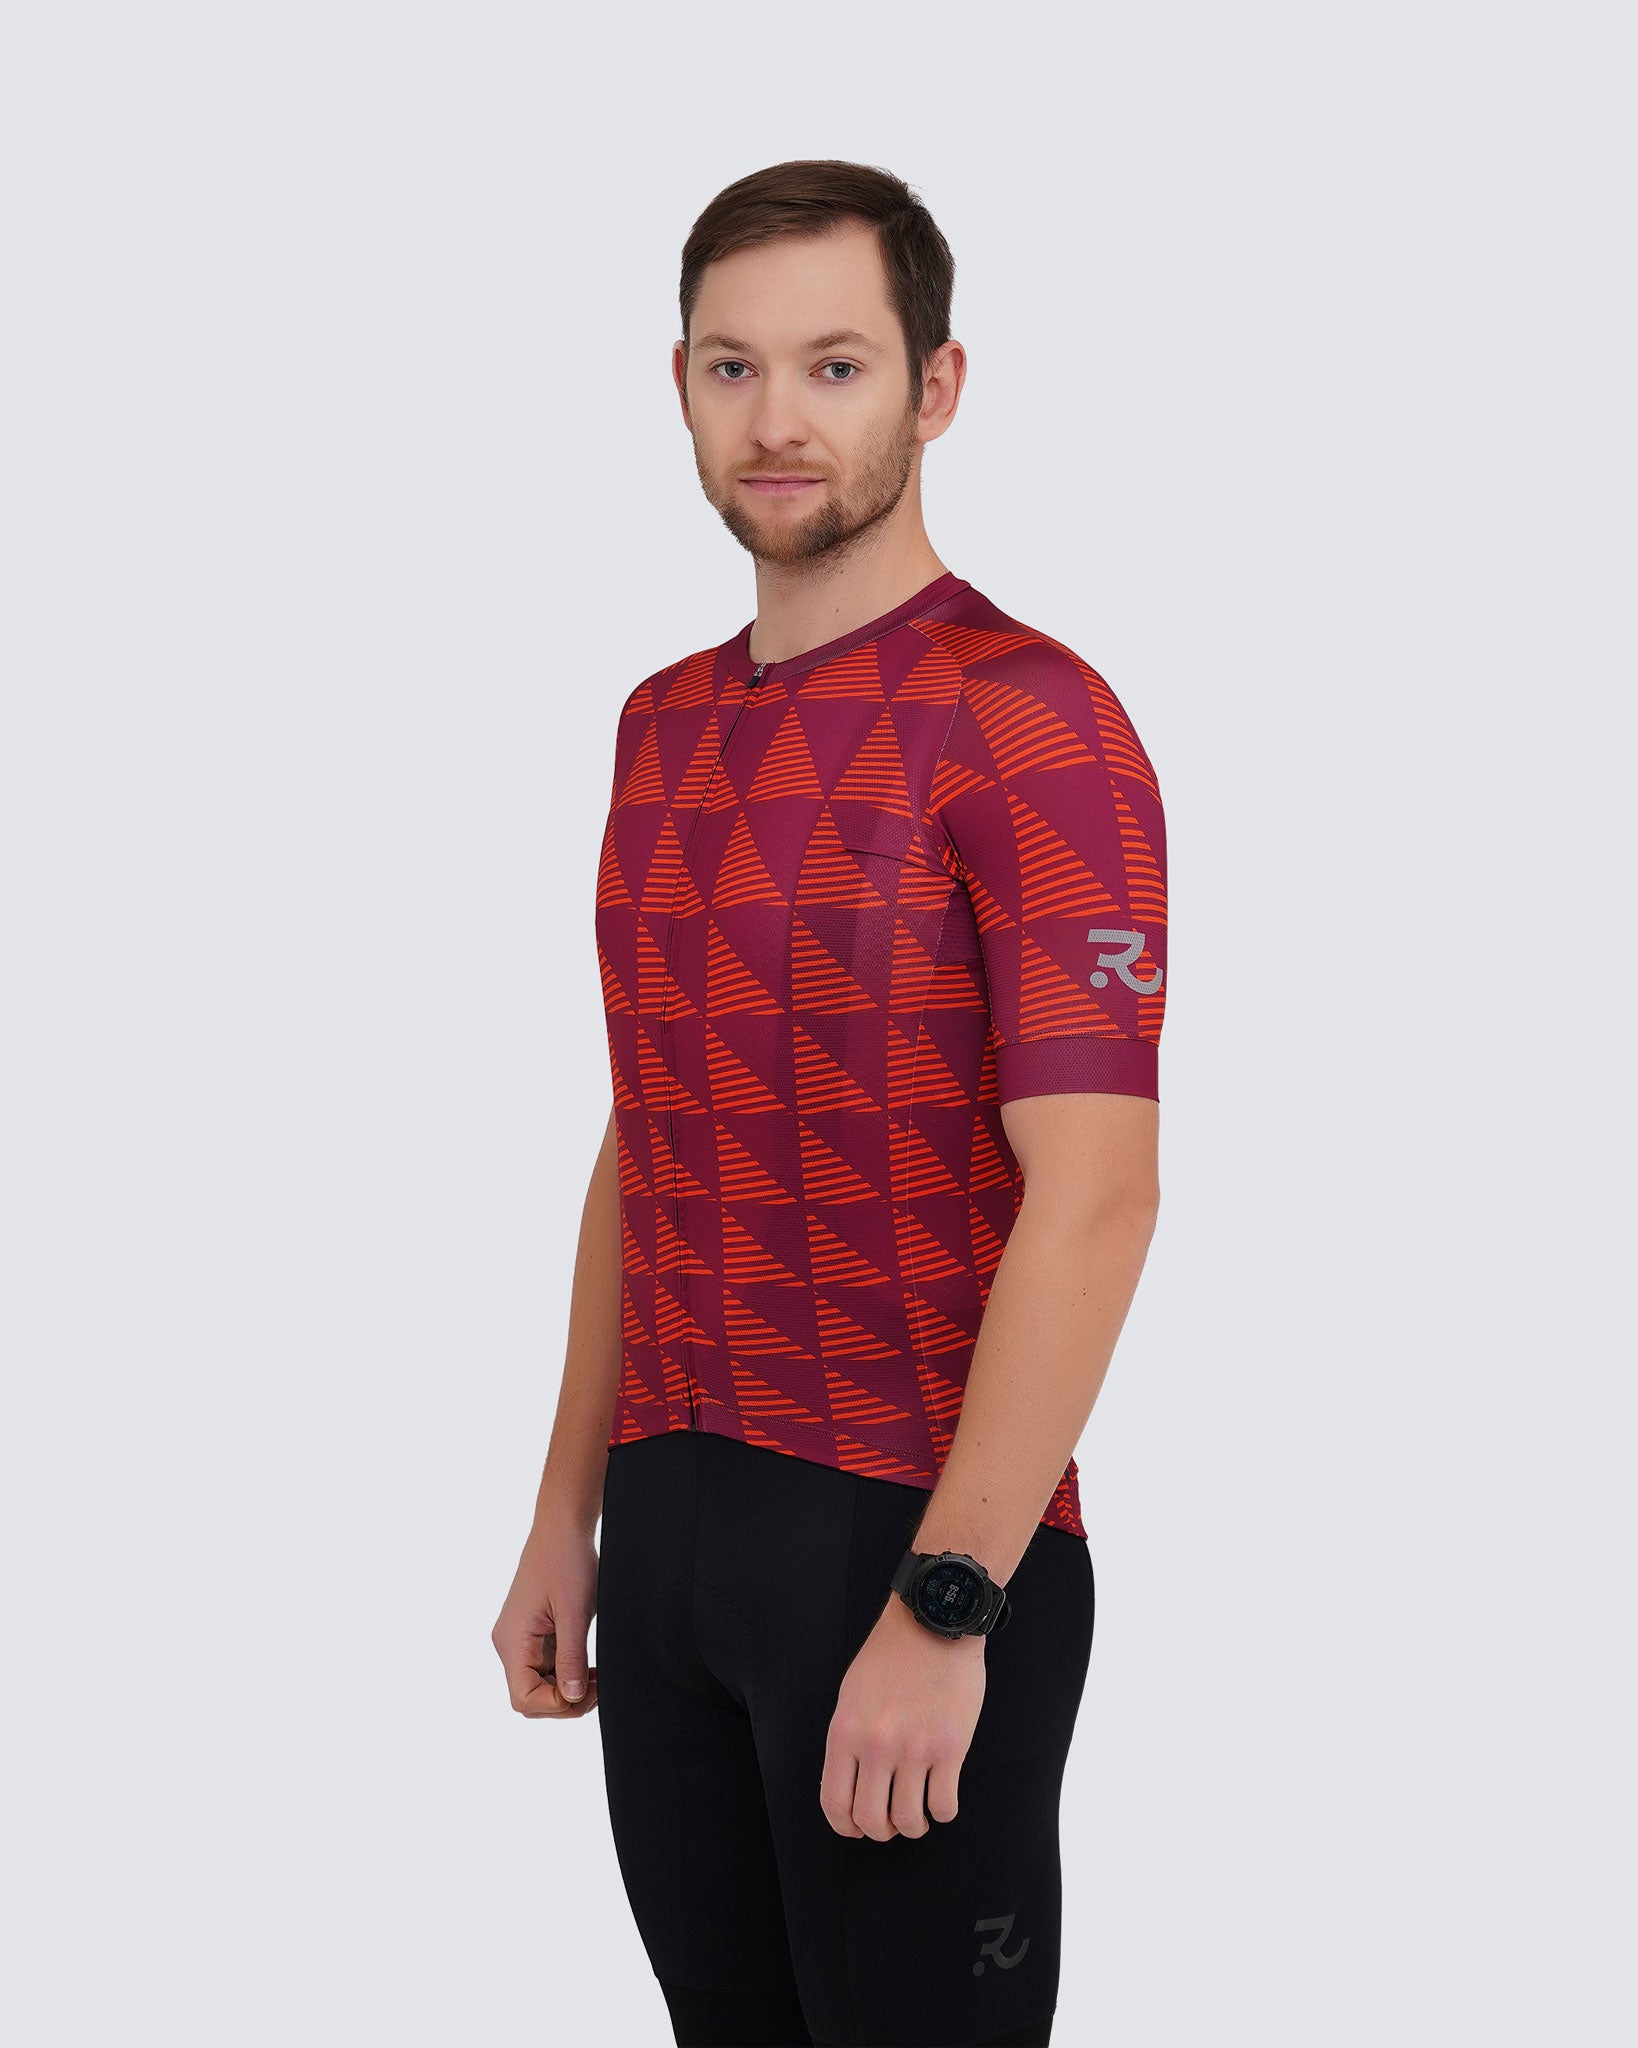 side view of red jersey for men with diamond pattern